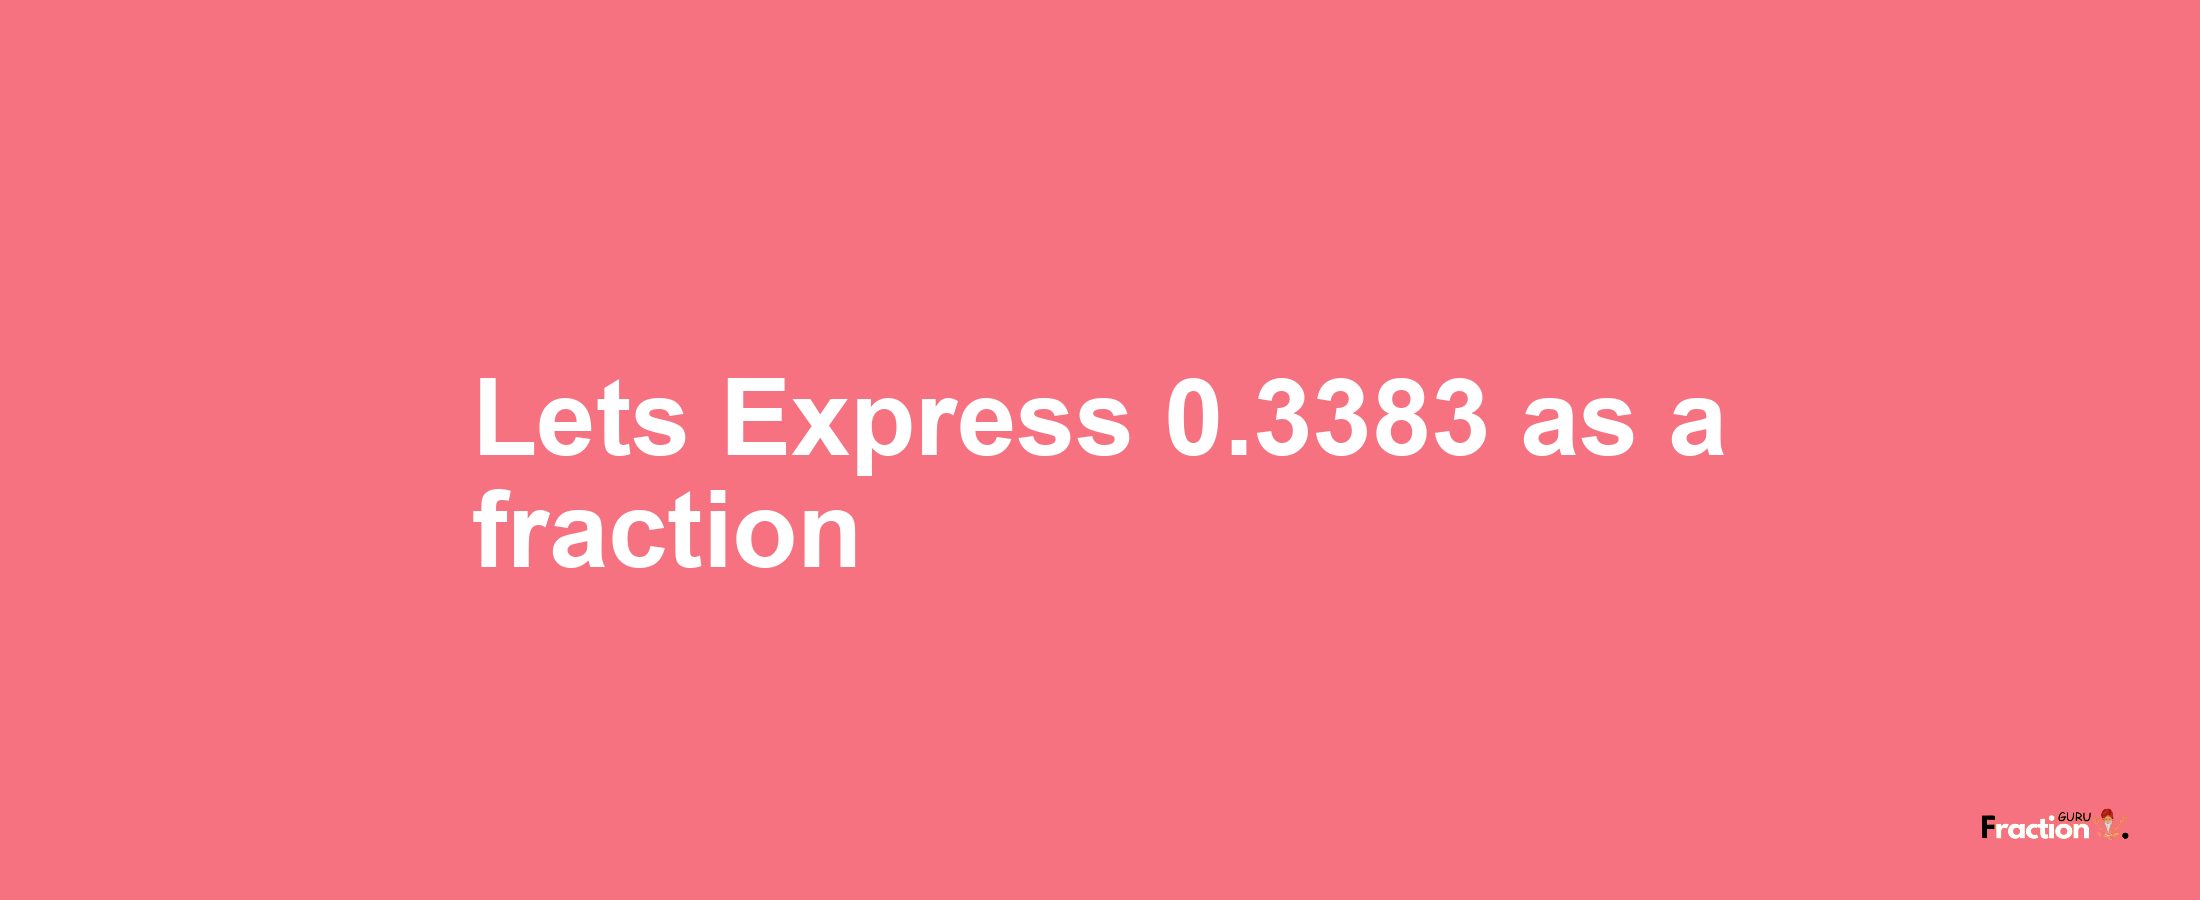 Lets Express 0.3383 as afraction